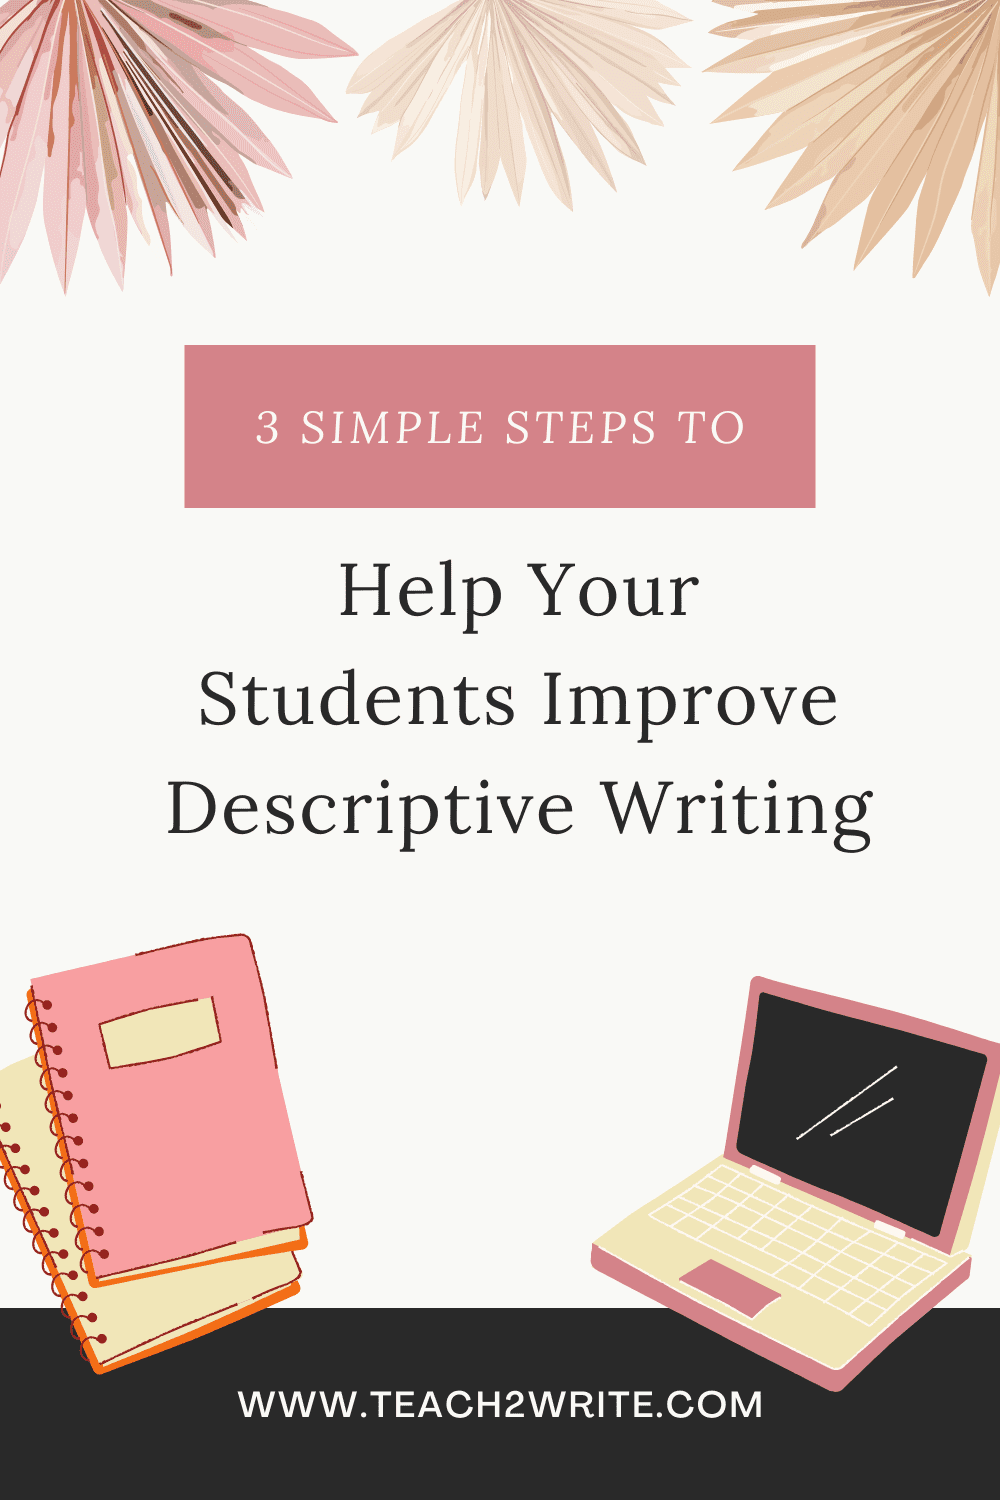 3 simple steps to improve student writing with picture of notebooks, computer